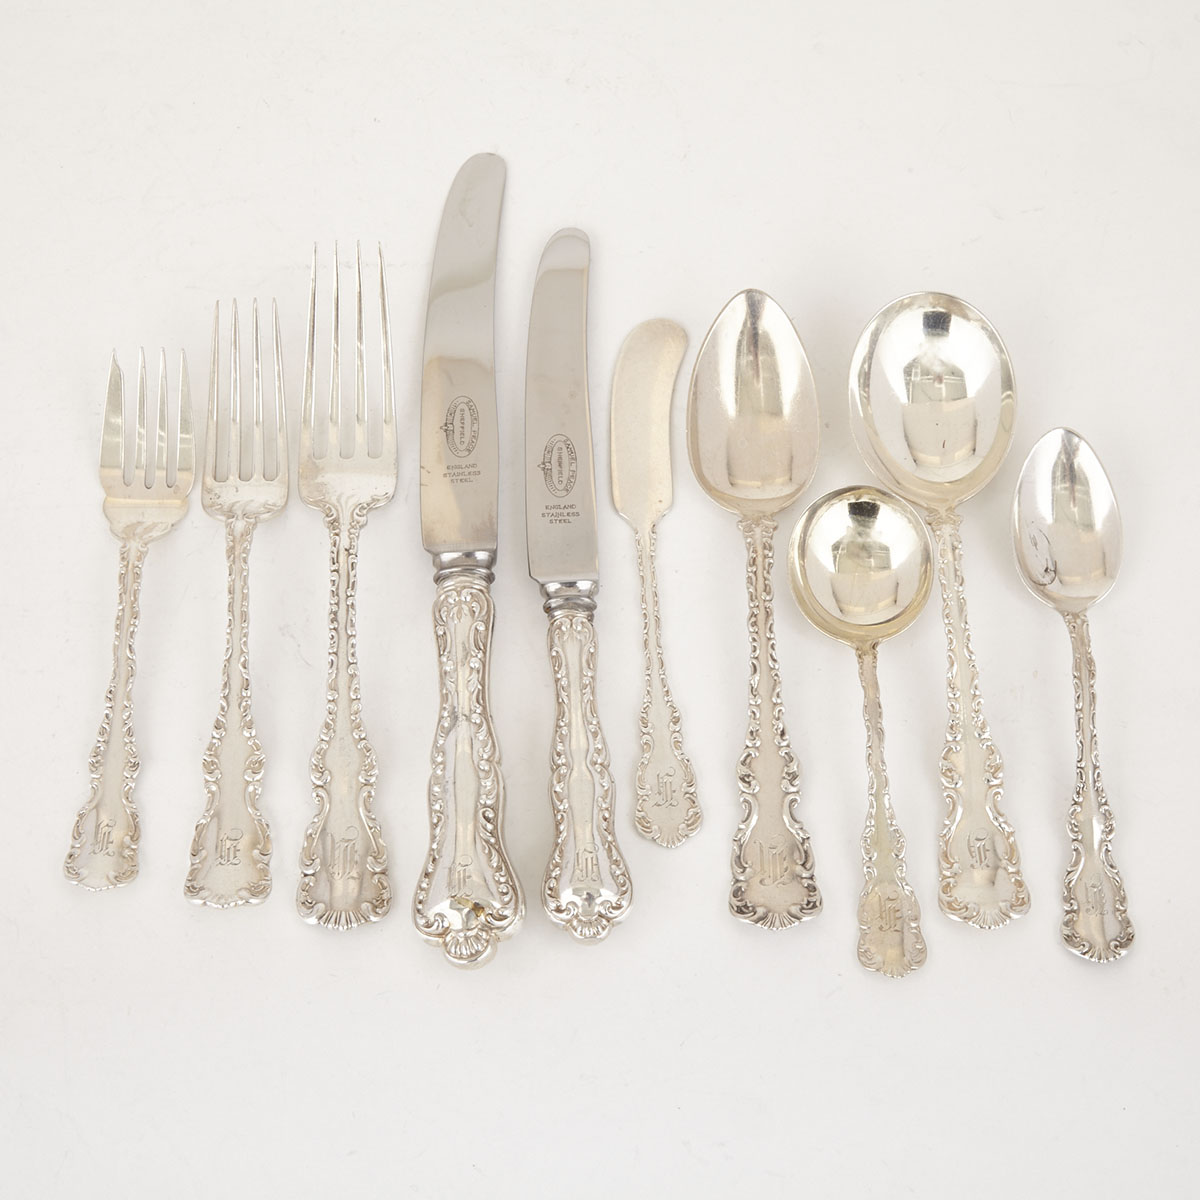 Canadian Silver ‘Louis XV’ Pattern Flatware Service, Ryrie Bros. and Roden Bros., Toronto, Ont., early 20th century